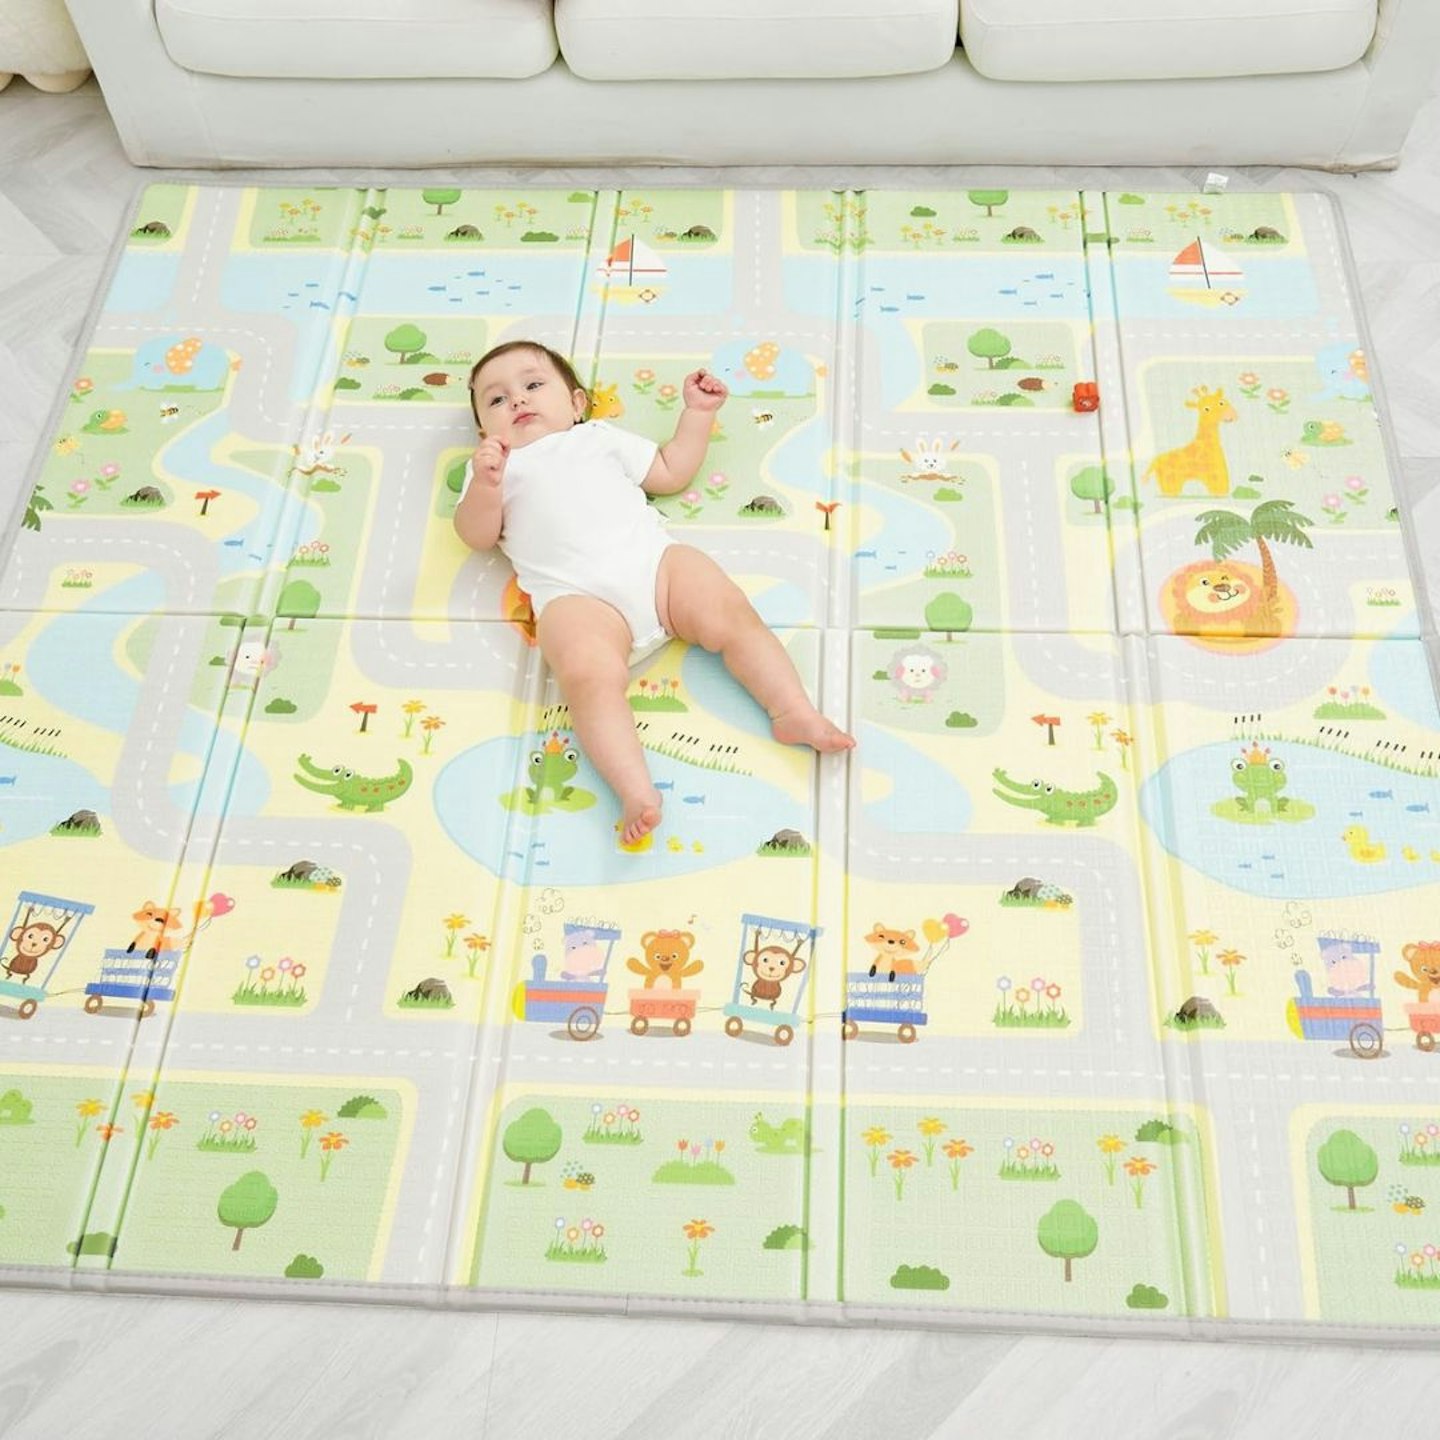 SUPERBE BEBE Reversible and Non-Toxic Thick Foldable Waterproof Foam Baby Play Mat